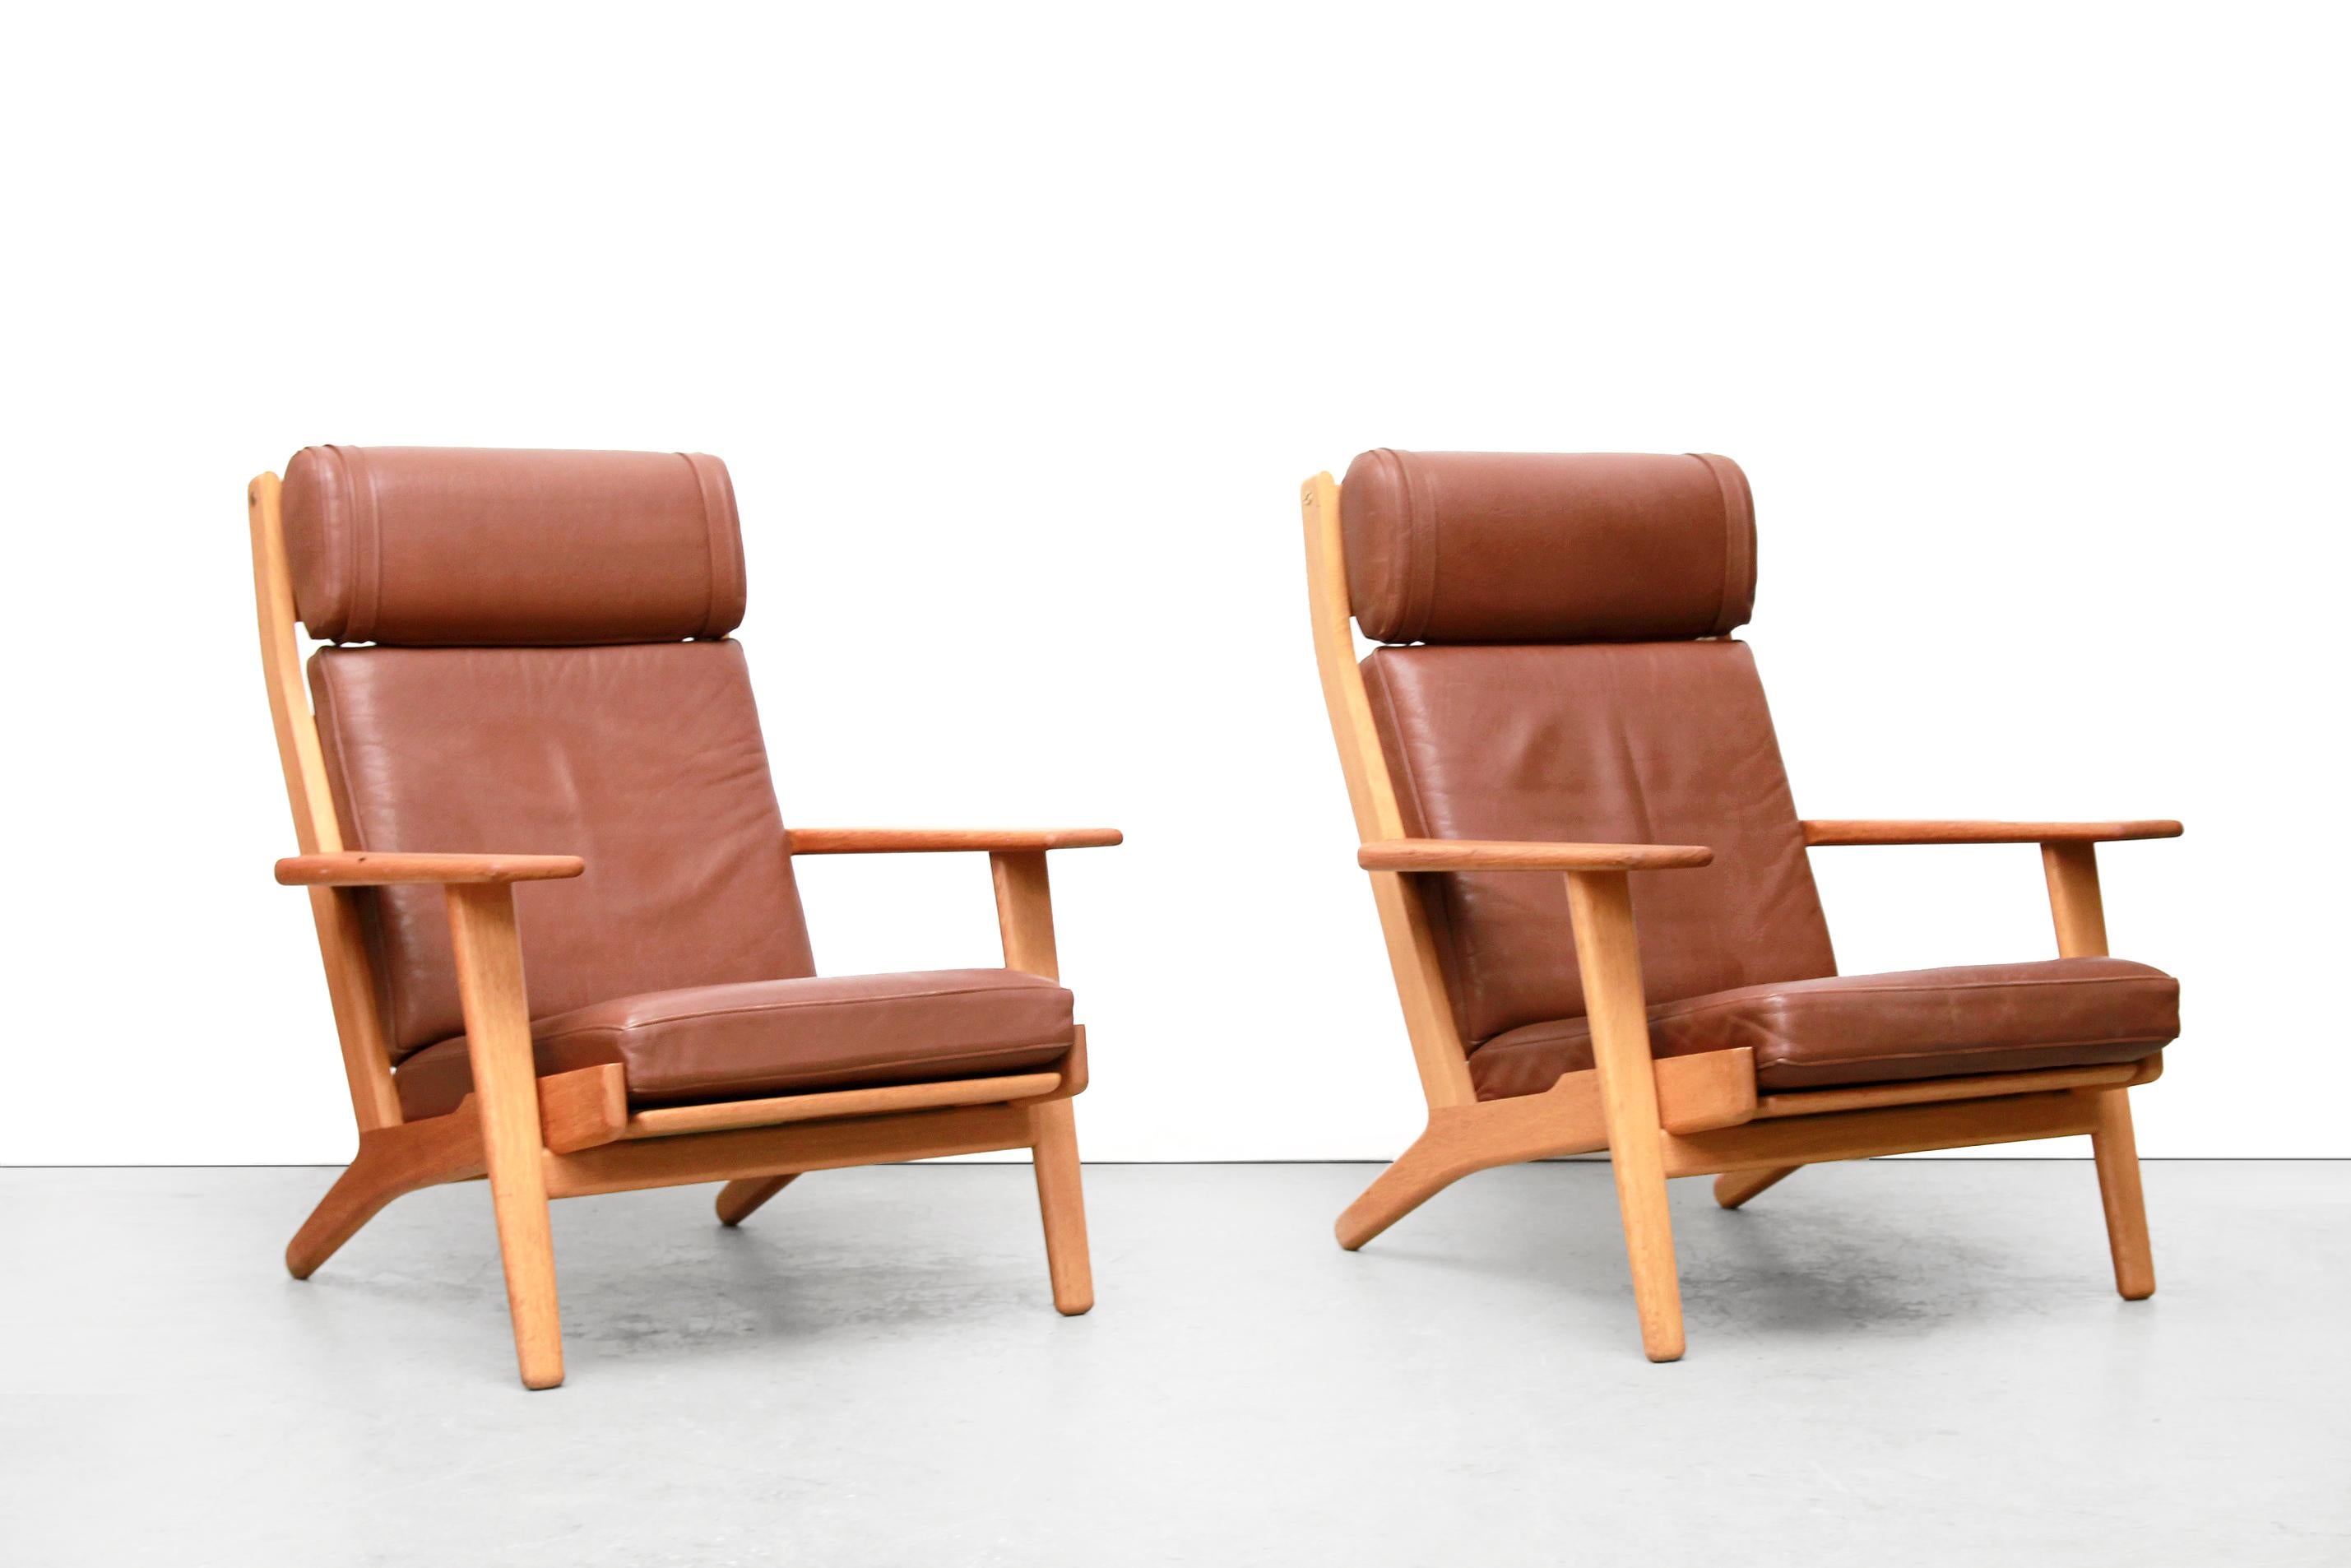 Two armchairs by Danish top designer Hans Wegner. Hans Jørgen Wegner was one of the most inventive of Danish furniture designers. These armchairs are made of solid oak and are originally covered in brown leather. What is very important in Denmark is